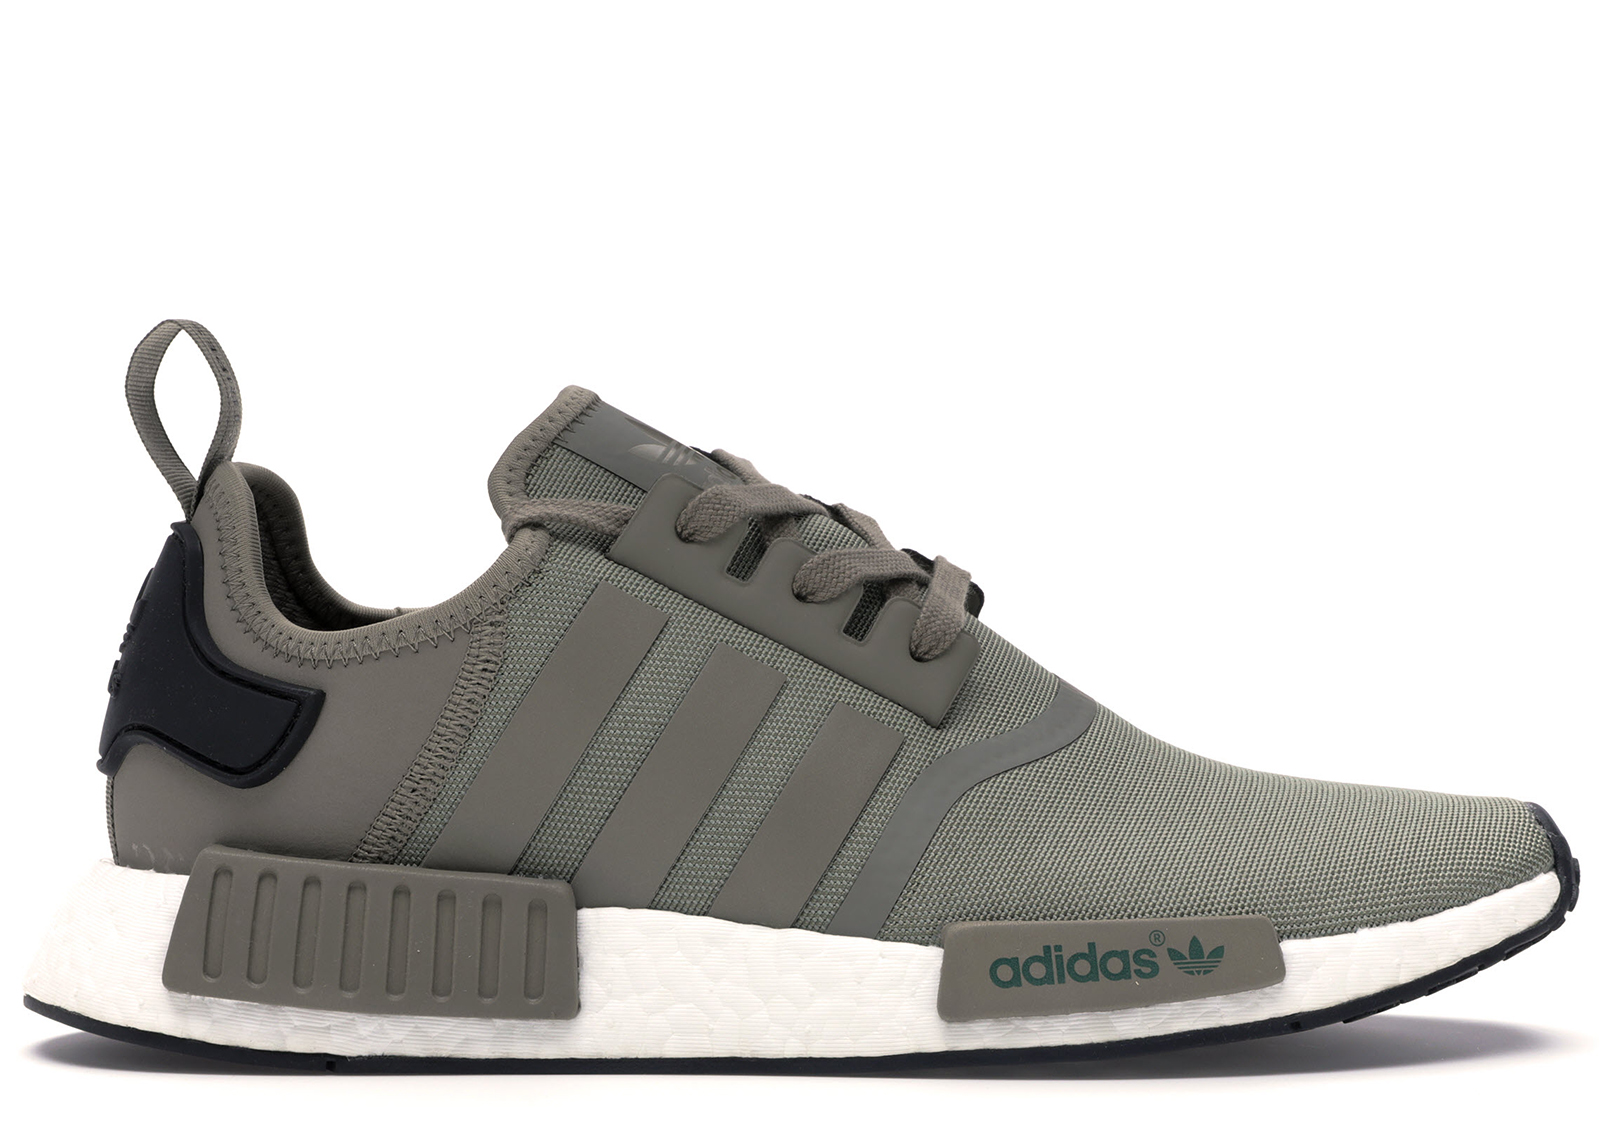 adidas nmd carbon trace cargo